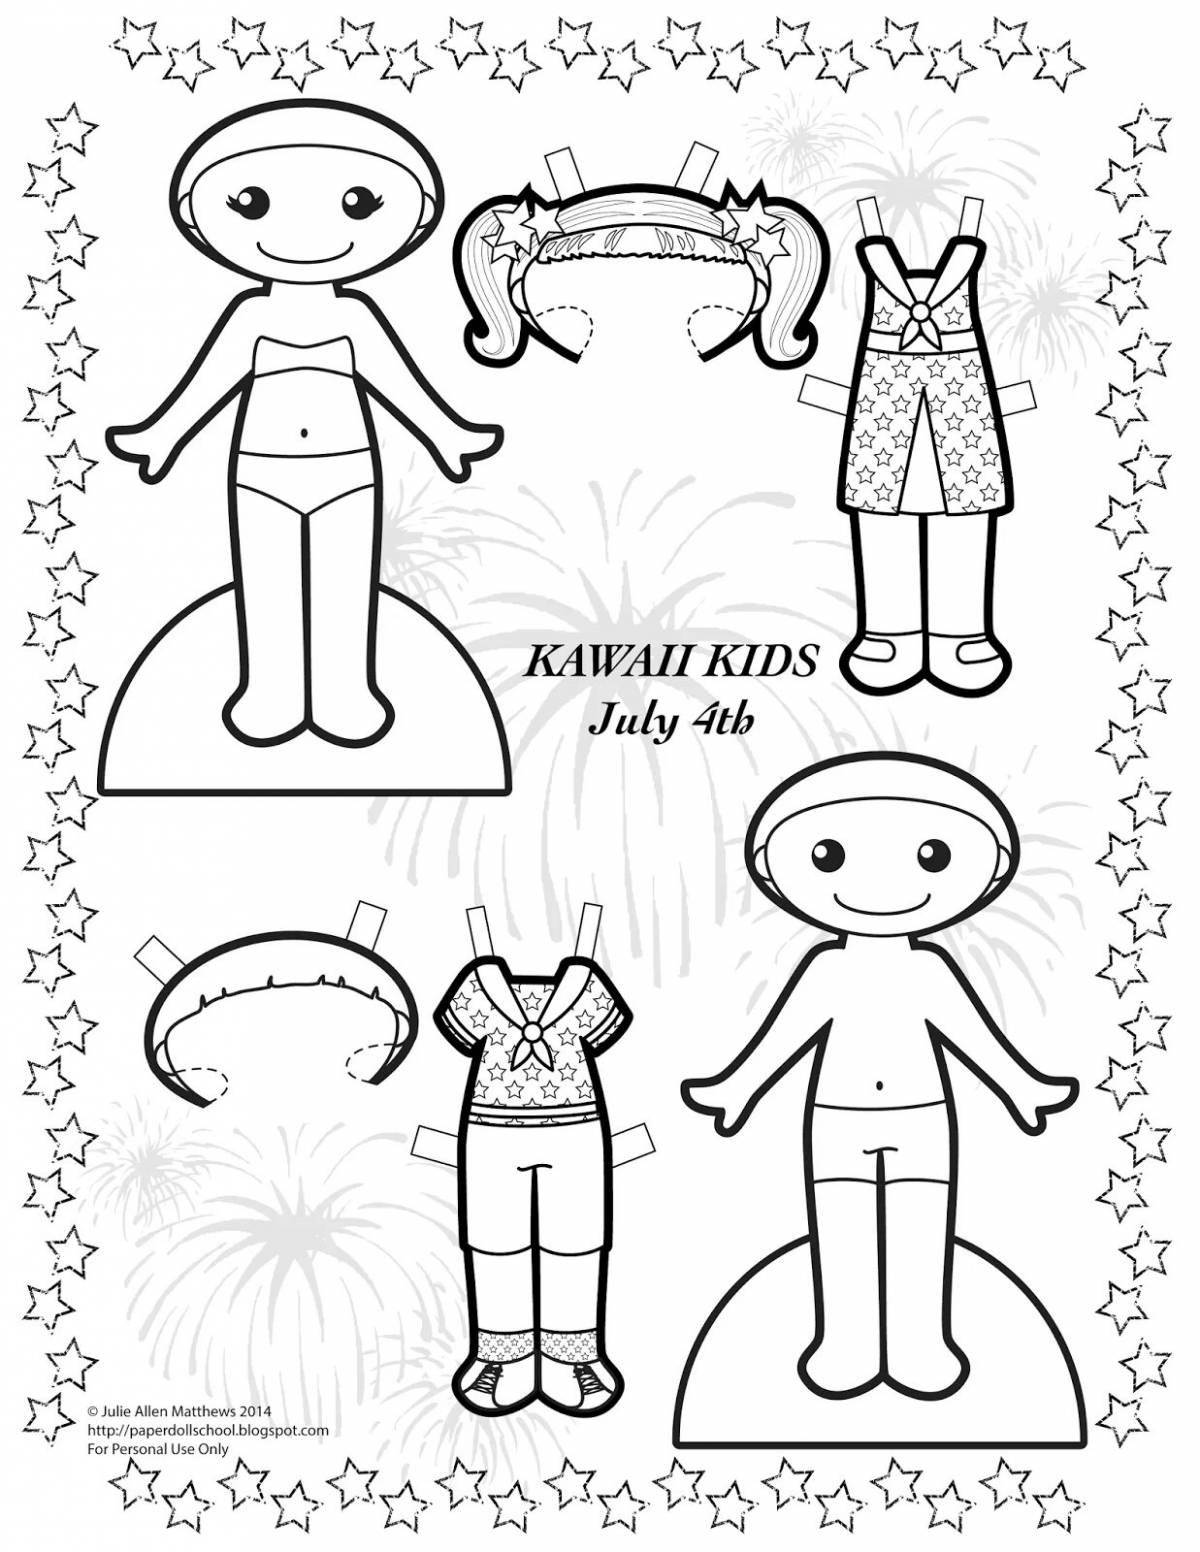 Crazy Wednesday coloring pages for kids